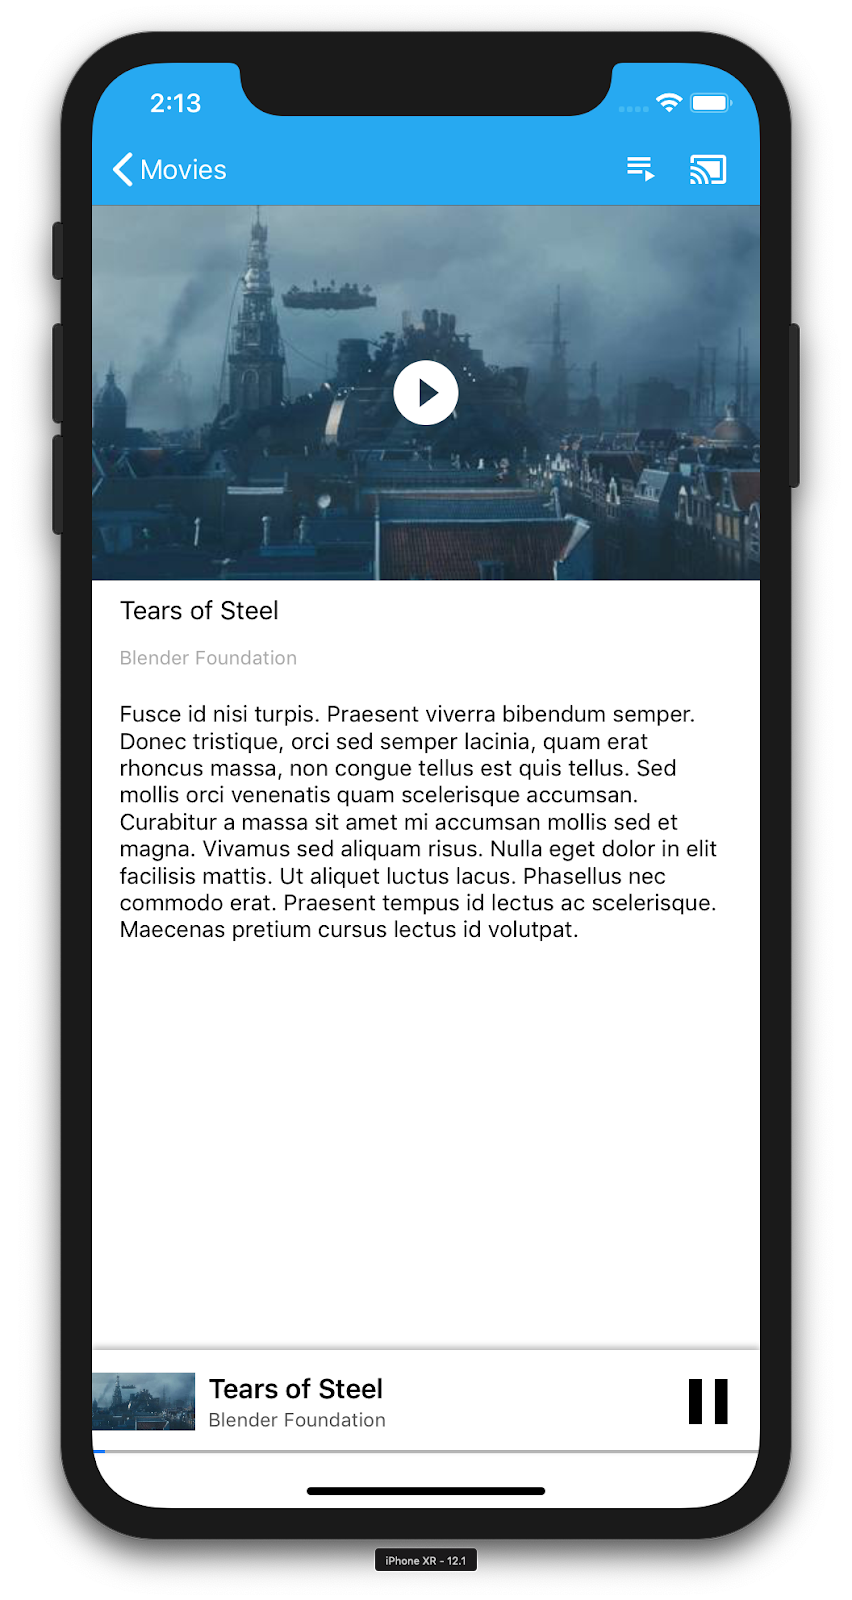 Illustration of an iPhone running CastVideos app, which shows details on a particular video ('Tears of Steel'). At the bottom is the mini player